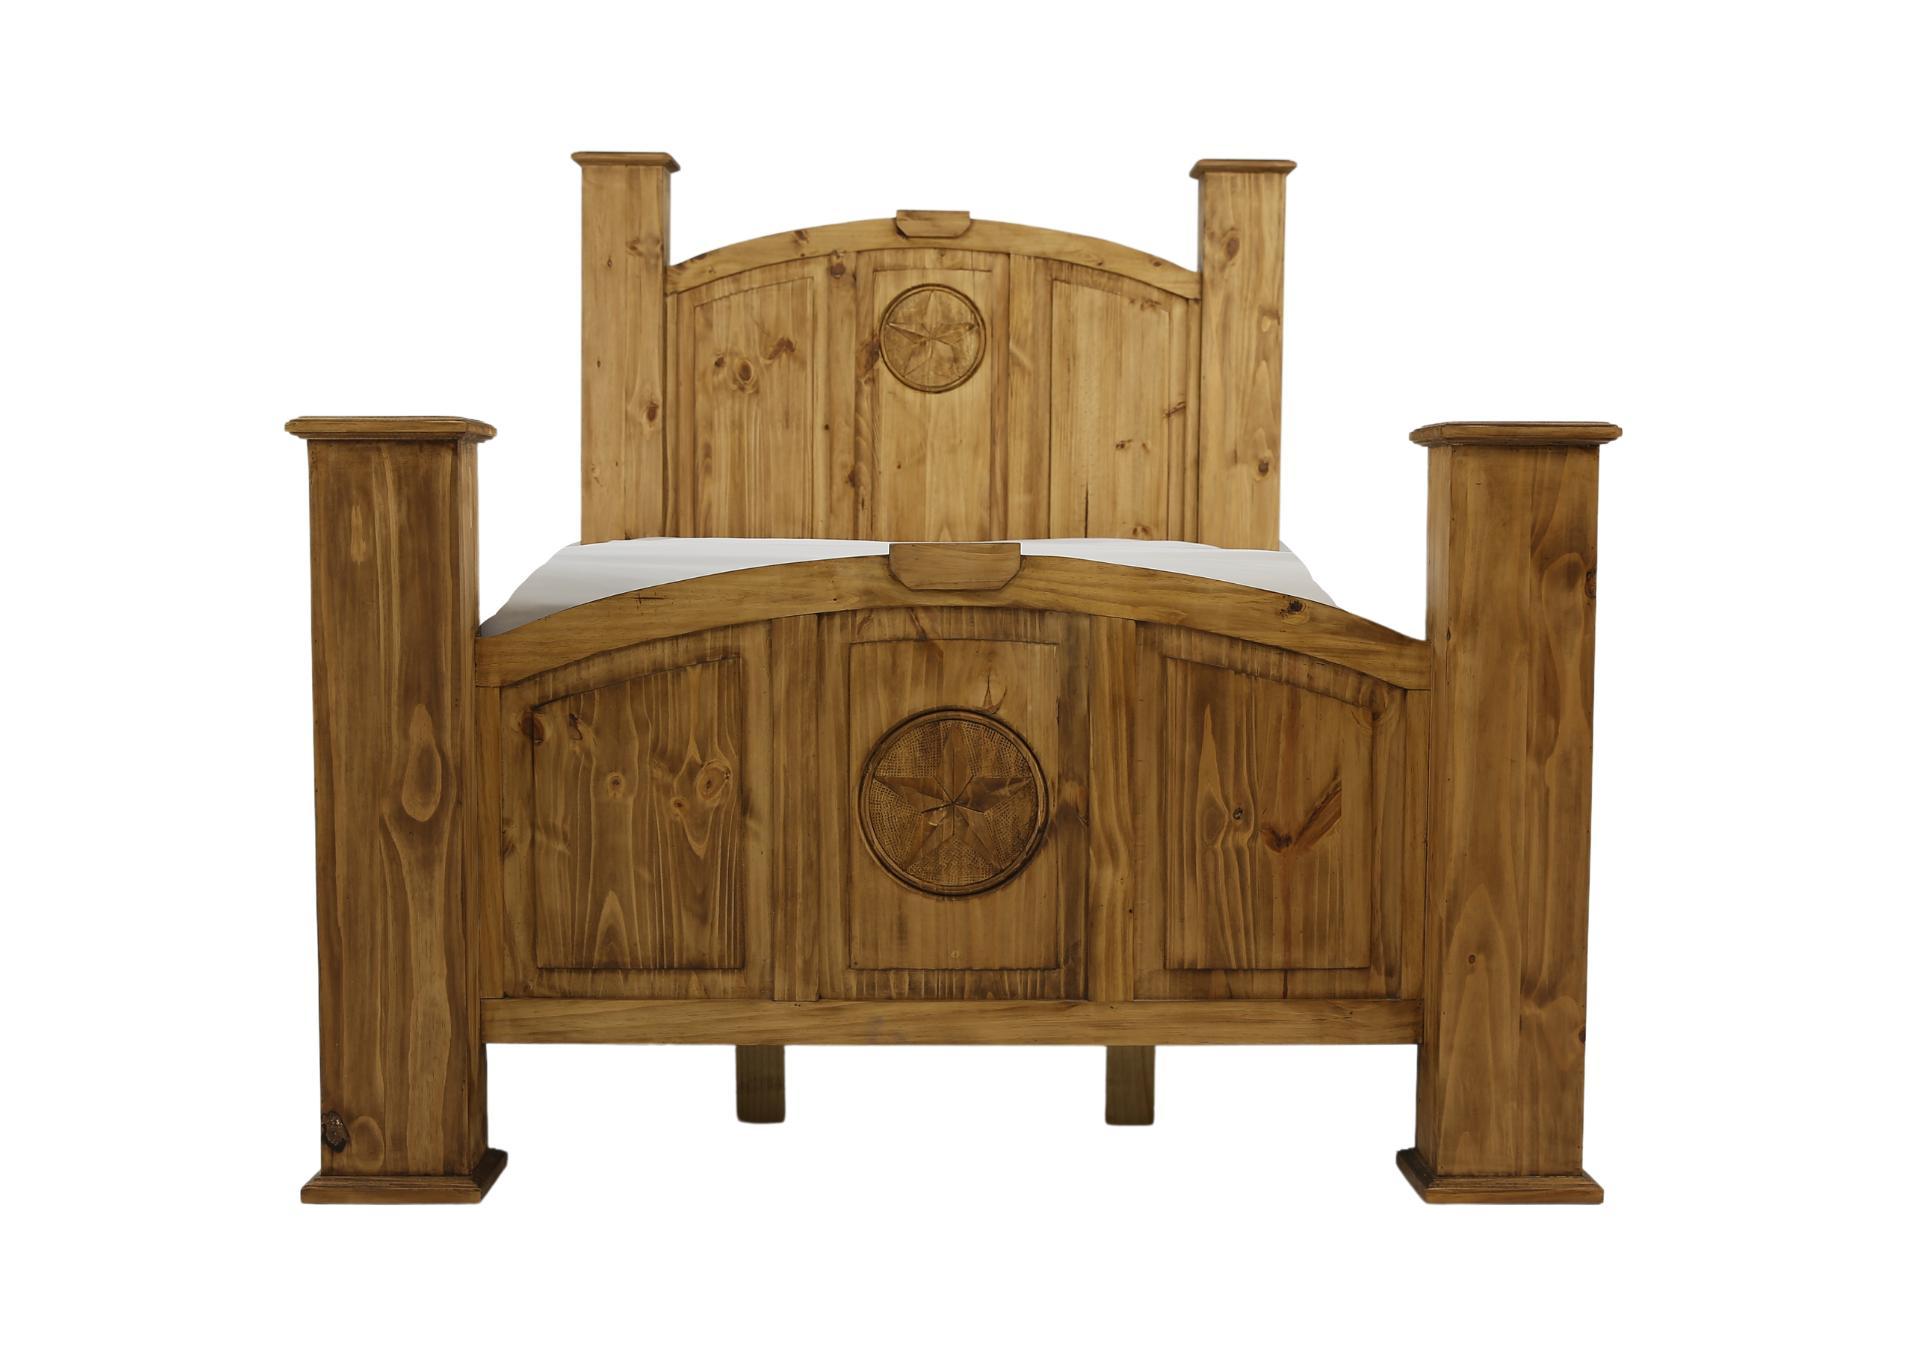 MANSION TEXAS STAR QUEEN BED